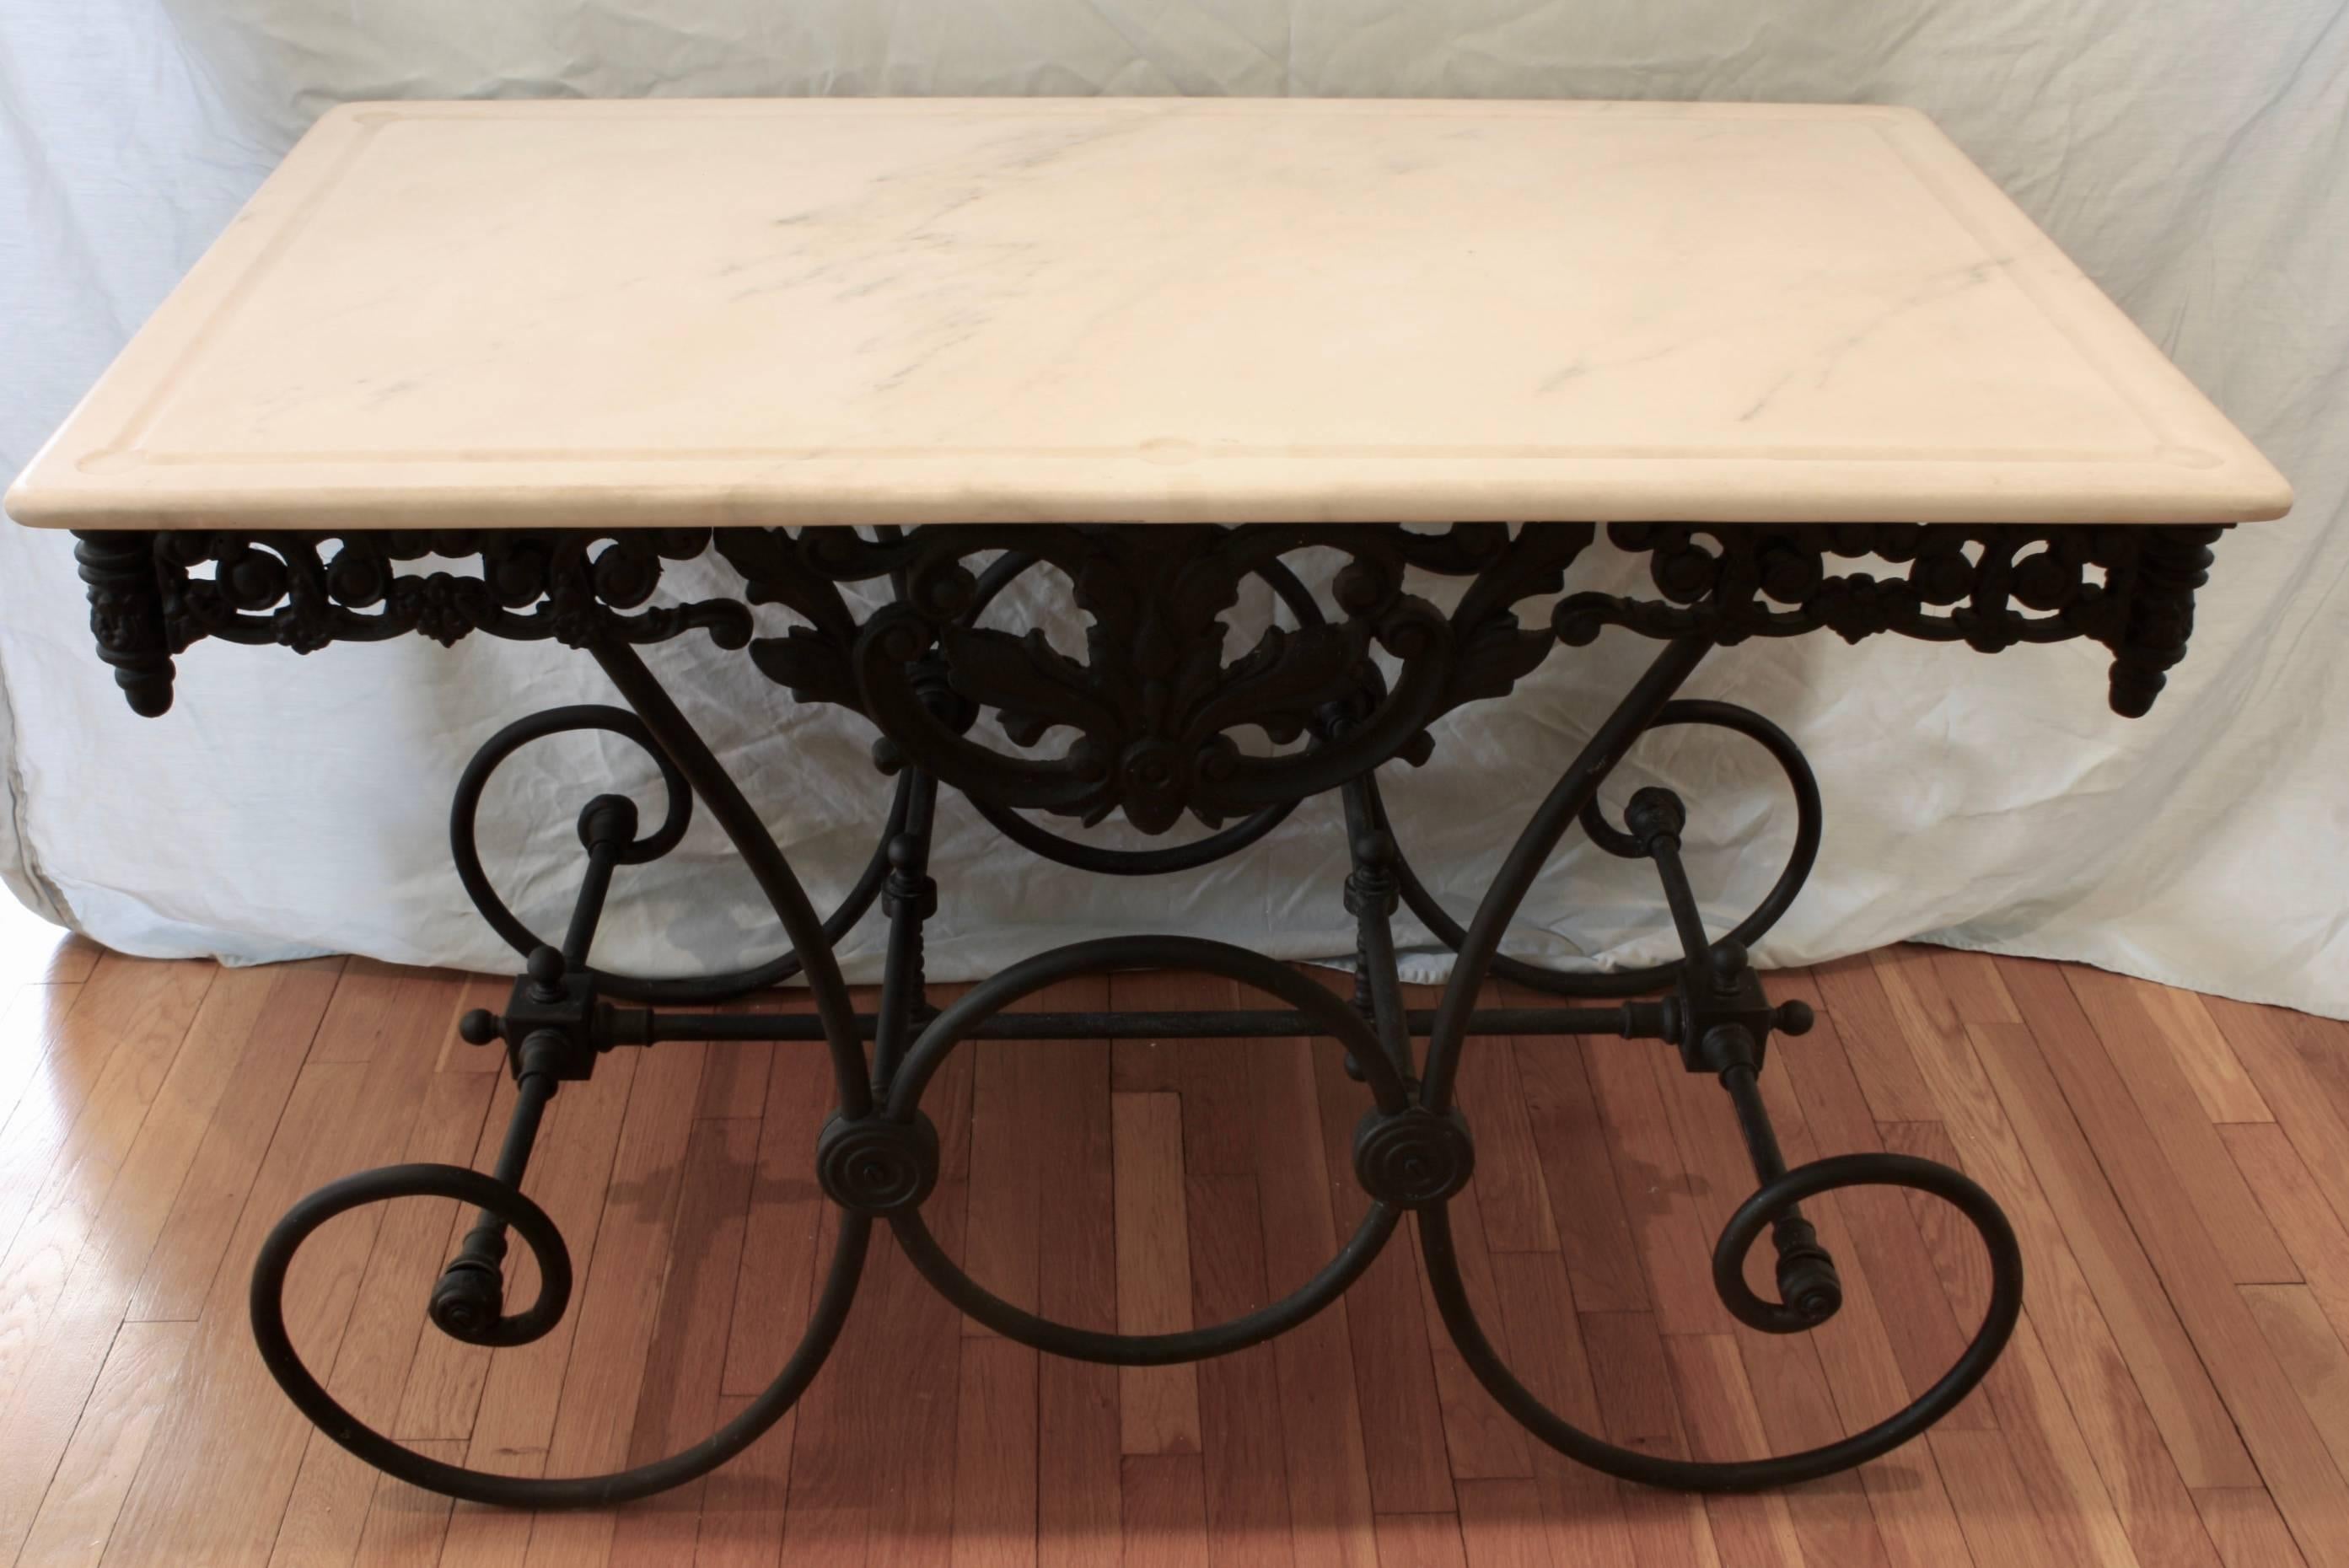 French cast iron and marble top Baker's table. The marble is white with some veining. The pierced cast iron apron features a stylized acanthus leaf in the front and back, and nice scrolling details around the perimeter, with finials in each corner.